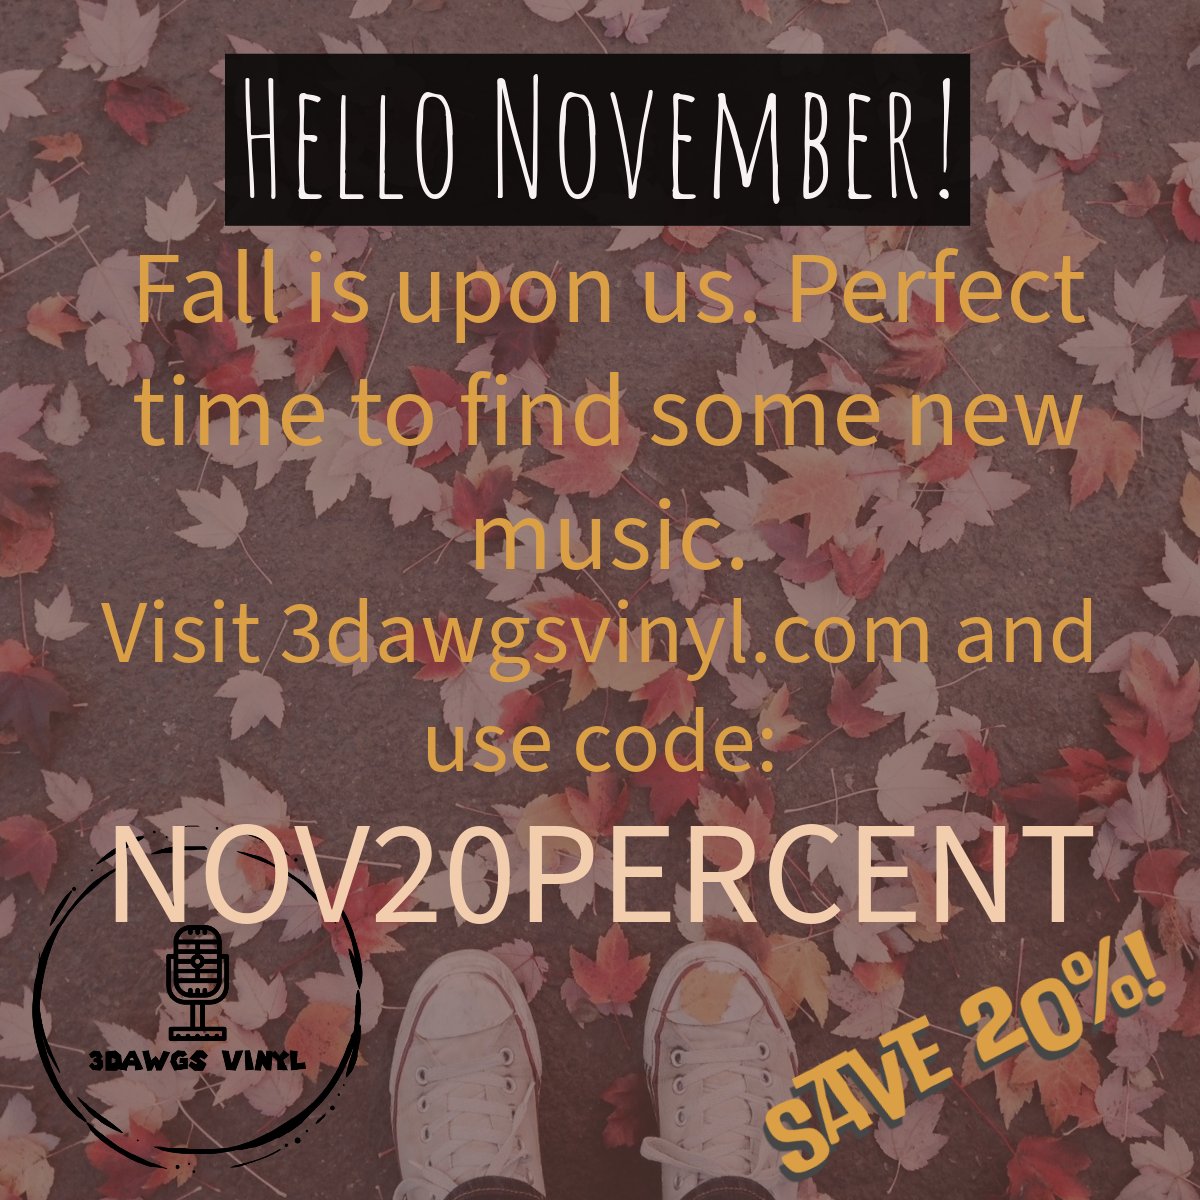 HELLO NOVEMBER/Time to grab a hot coco, start up the fireplace & discover some new music. To help, we'll save you 20% on your purchase. Use code: NOV20PERCENT until Nov 15, 2023. 3dawgsvinyl.com

#savings #november #music #indierecordshop #records #ilovevinyl #vinyl